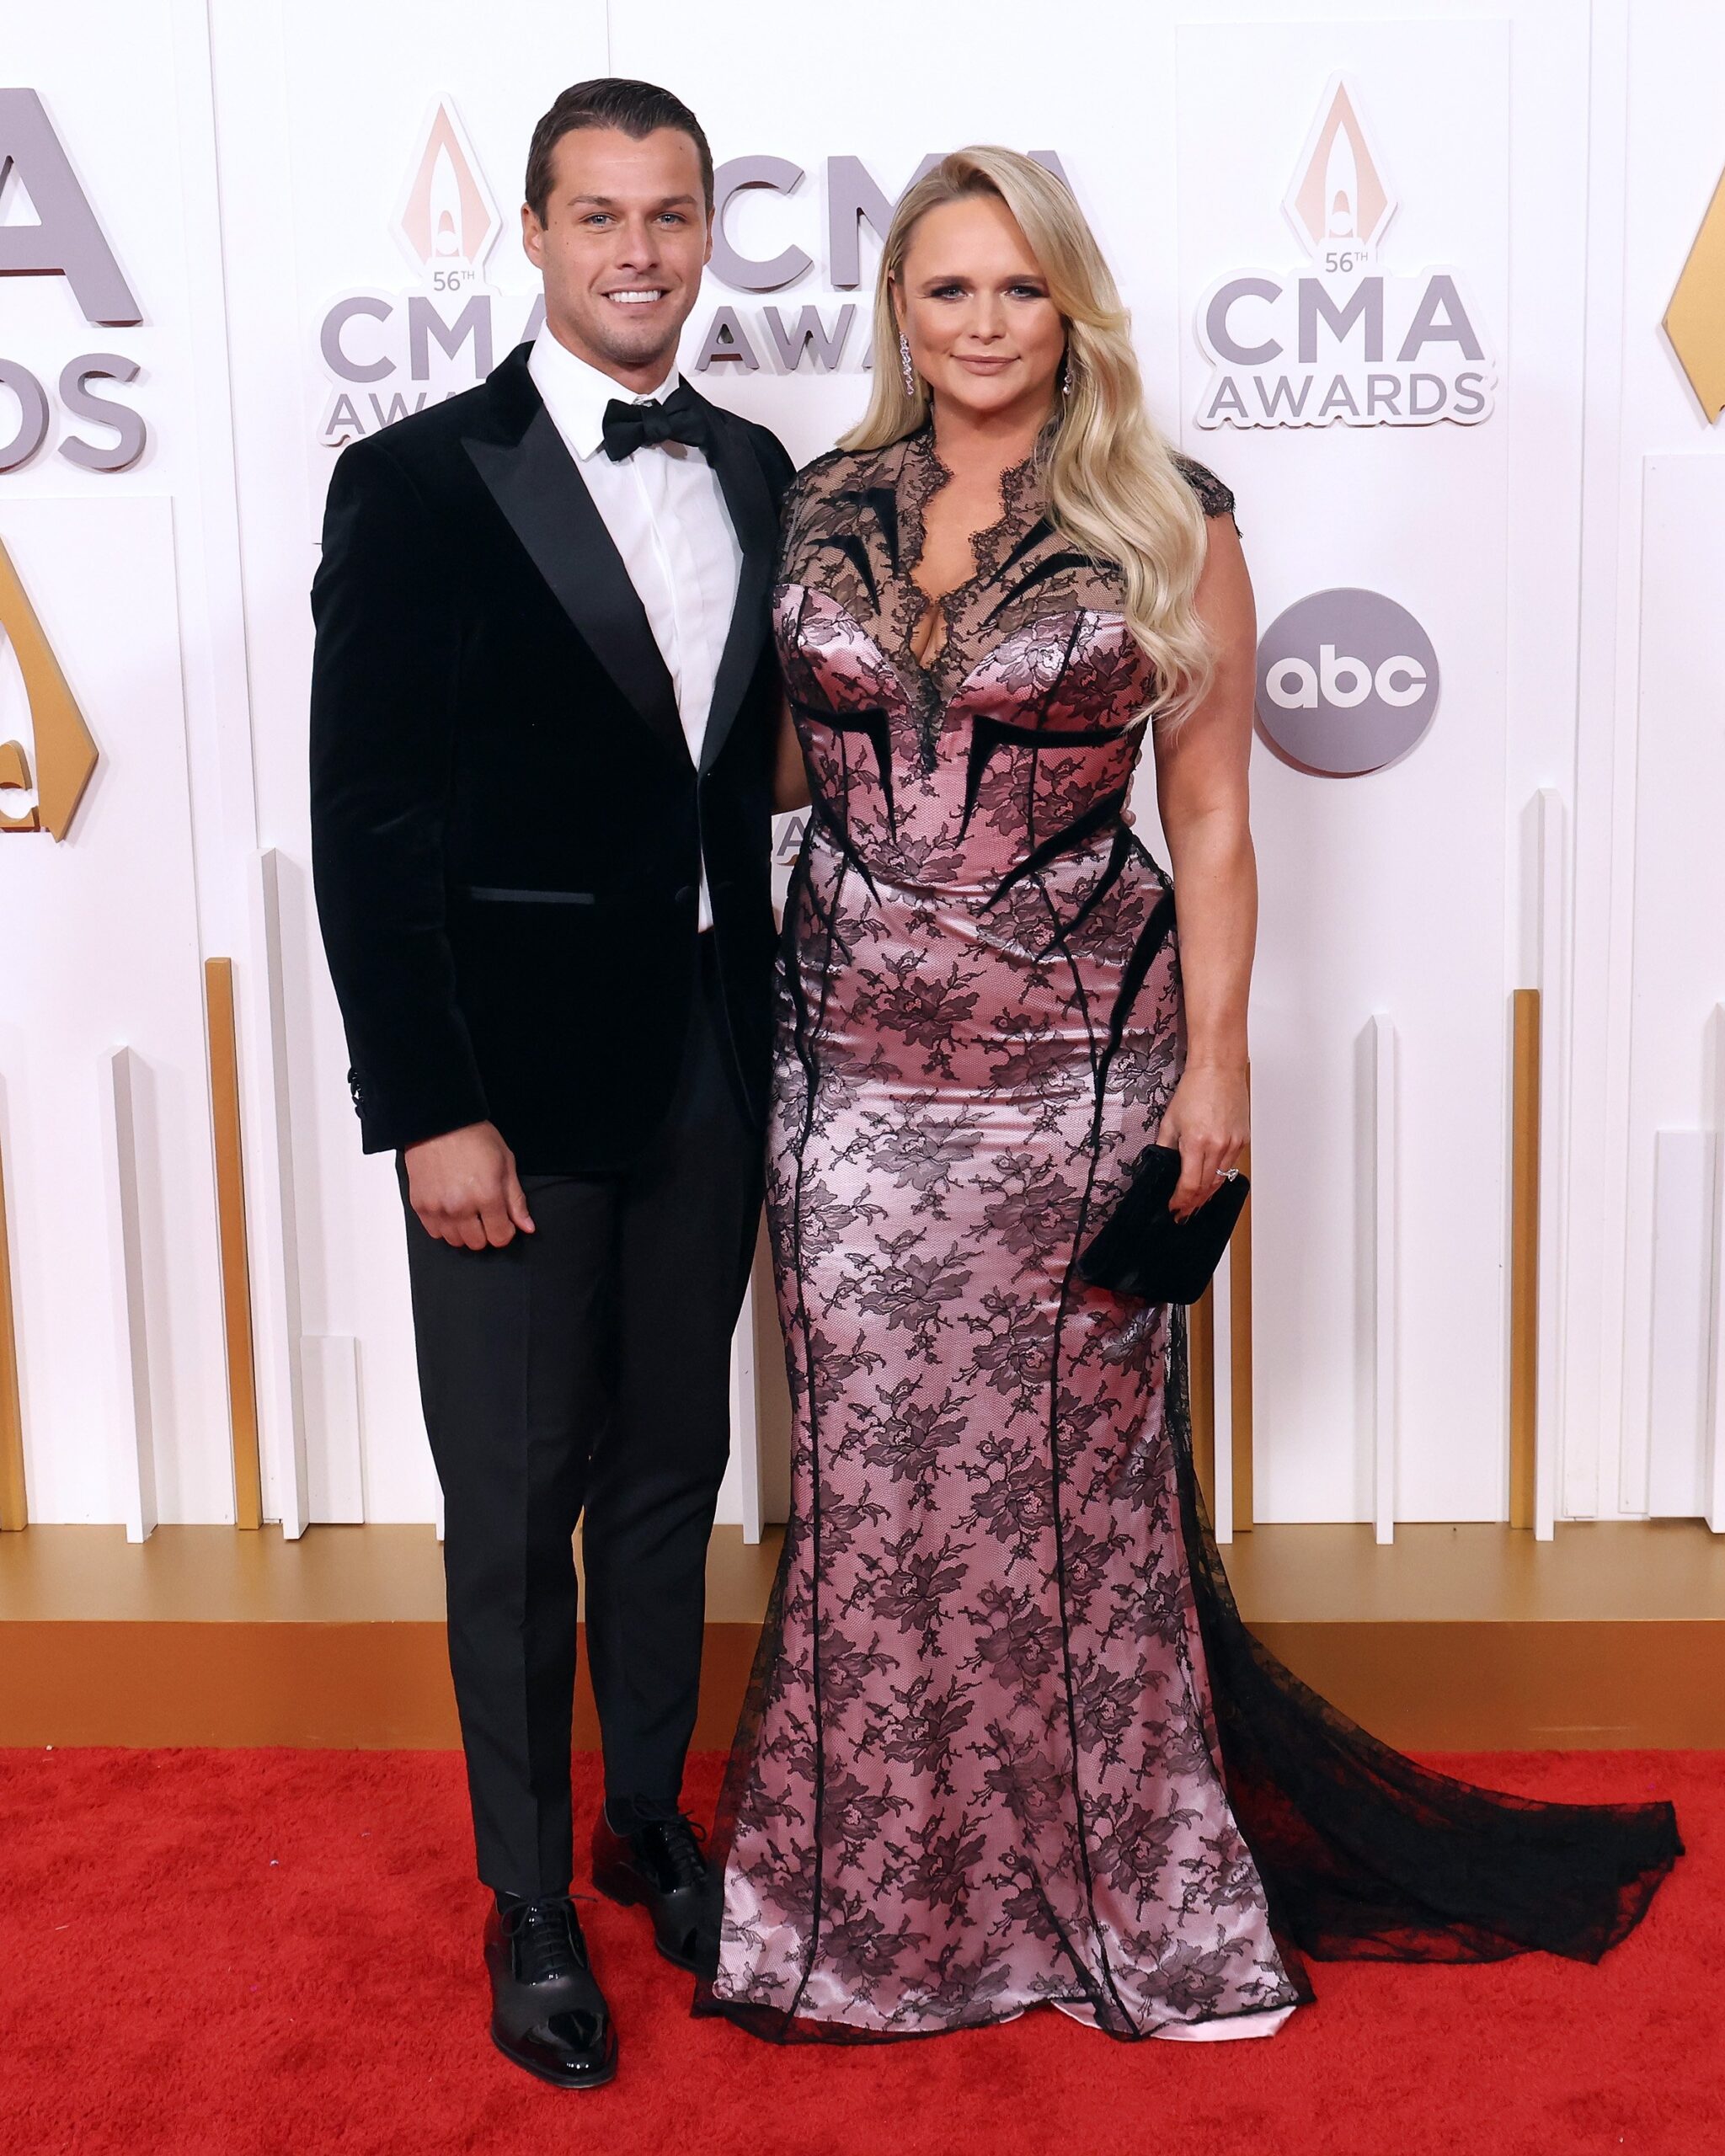 Brendan McLoughlin and Miranda Lambert at the 56th Annual CMA Awards on November 9, 2022, in Nashville, Tennessee | Source: Getty Images